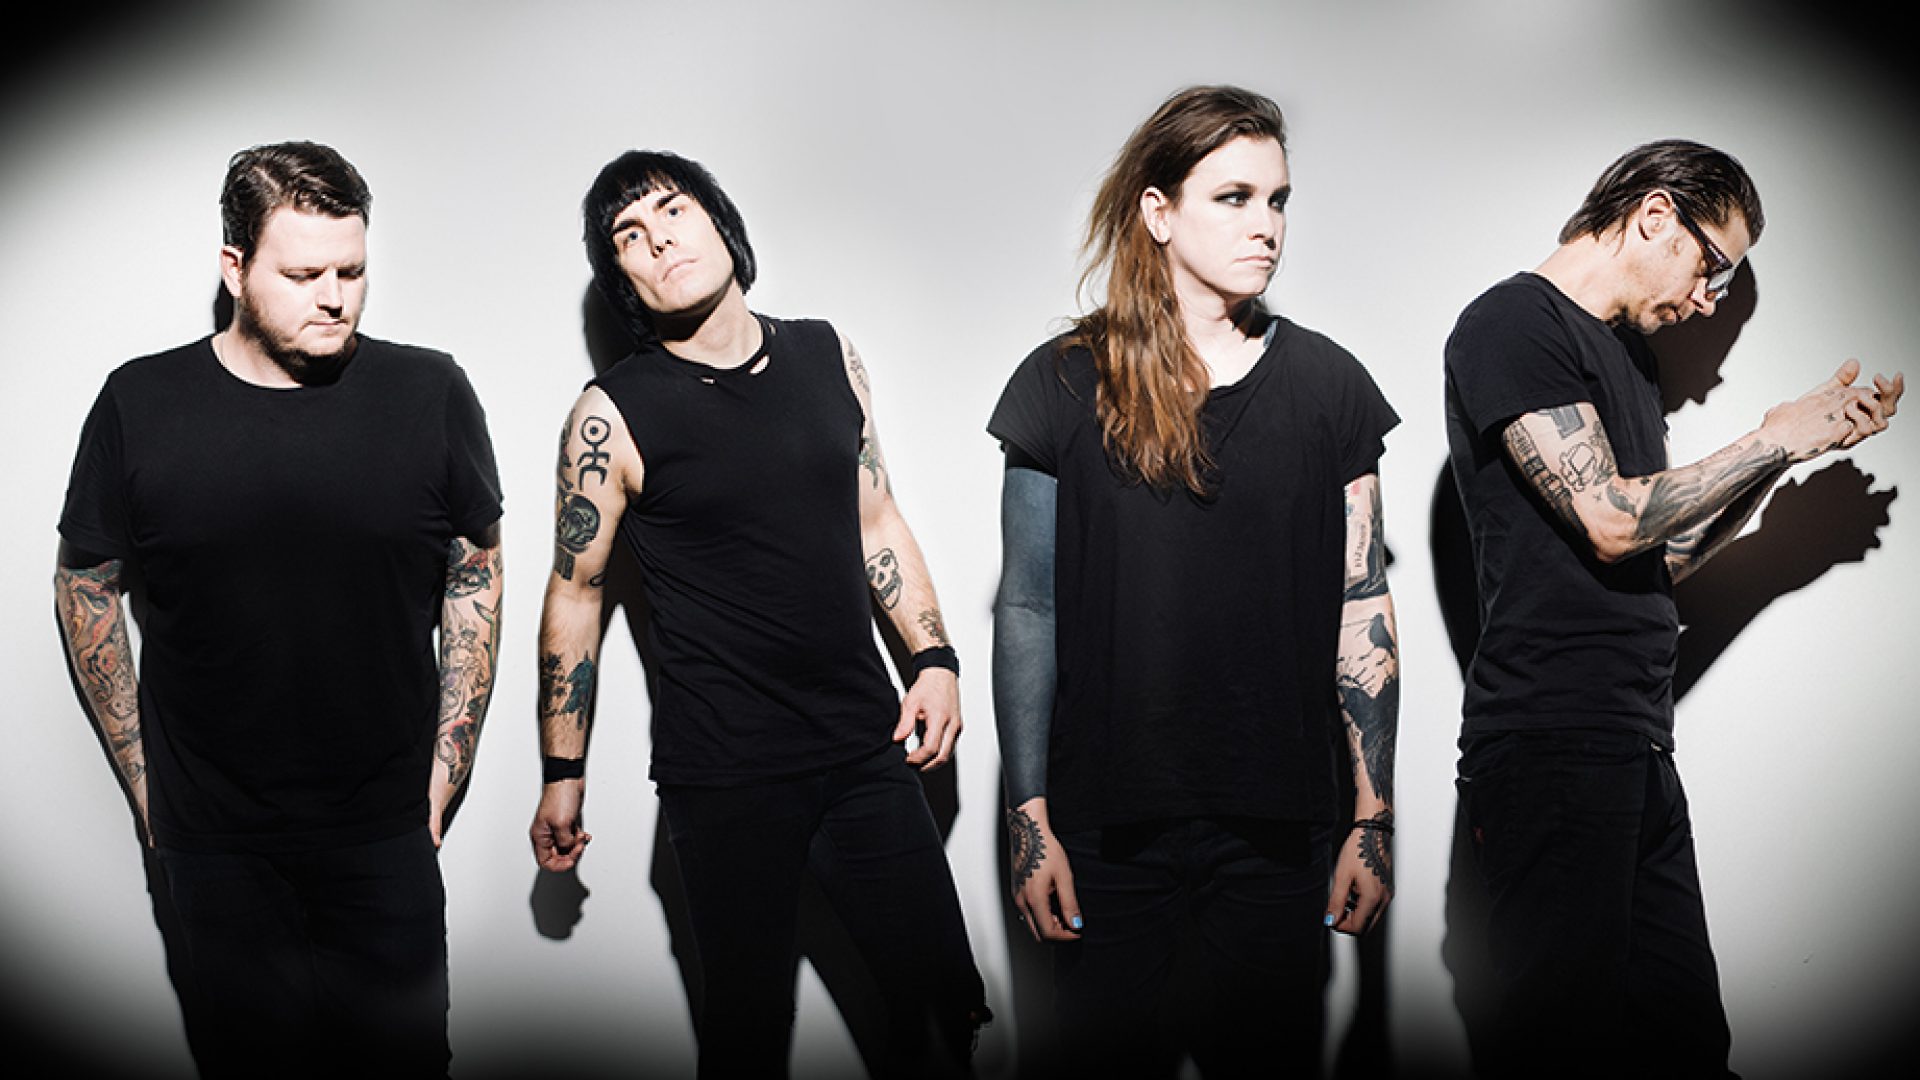 Against Me! coming back with new album